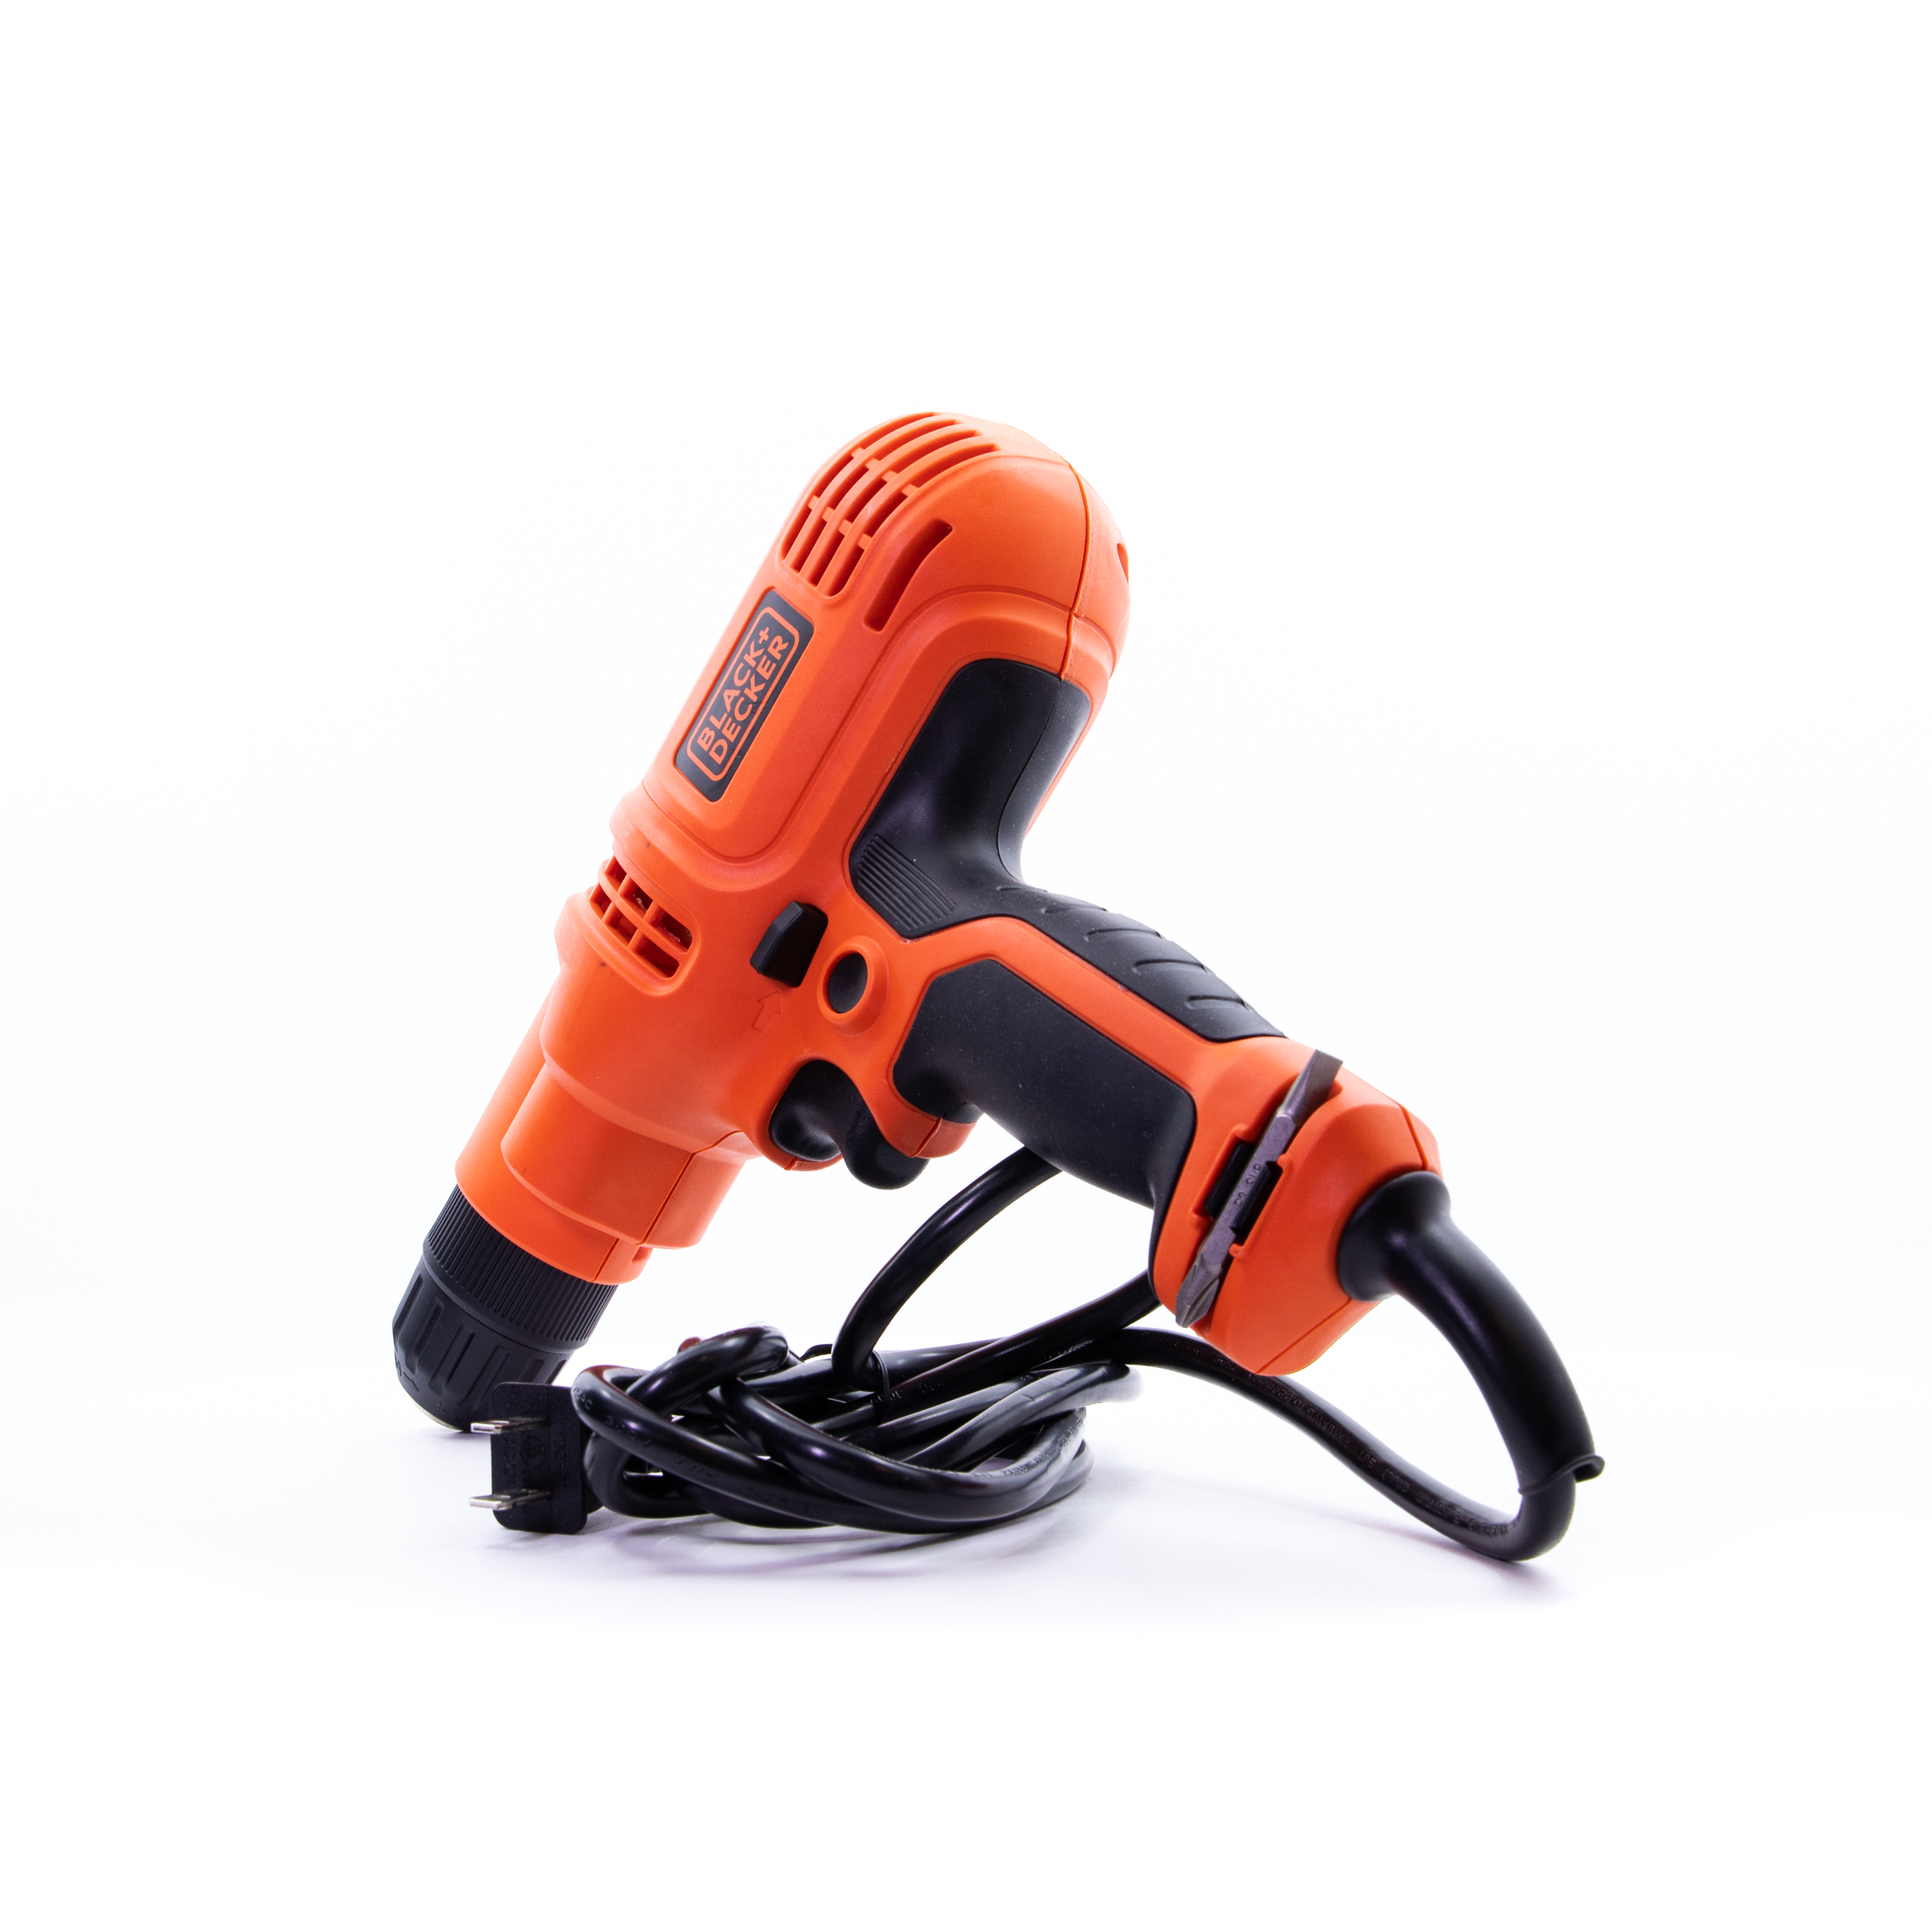 BLACK+DECKER Corded Drill, 5.2-Amp, 3/8-Inch (DR260C) - tools - by